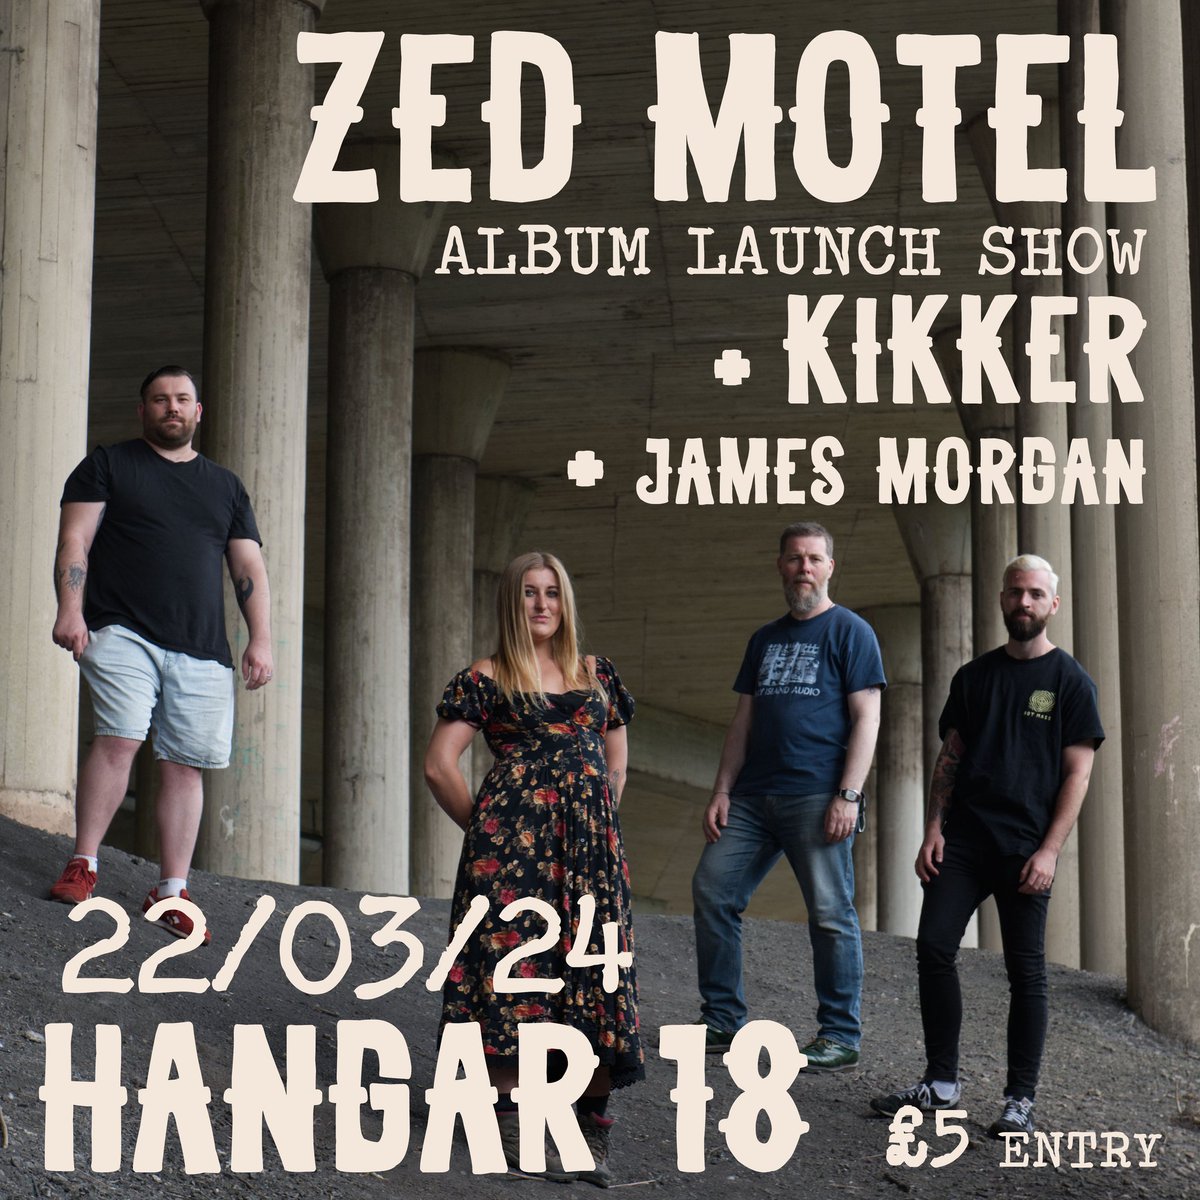 Just over a week now until our big album launch show at @Hangar18MV

Featuring special guests @kikkersuck, fresh from their all conquering appearance at Swansea Arena and the one and only James T. Morgan.